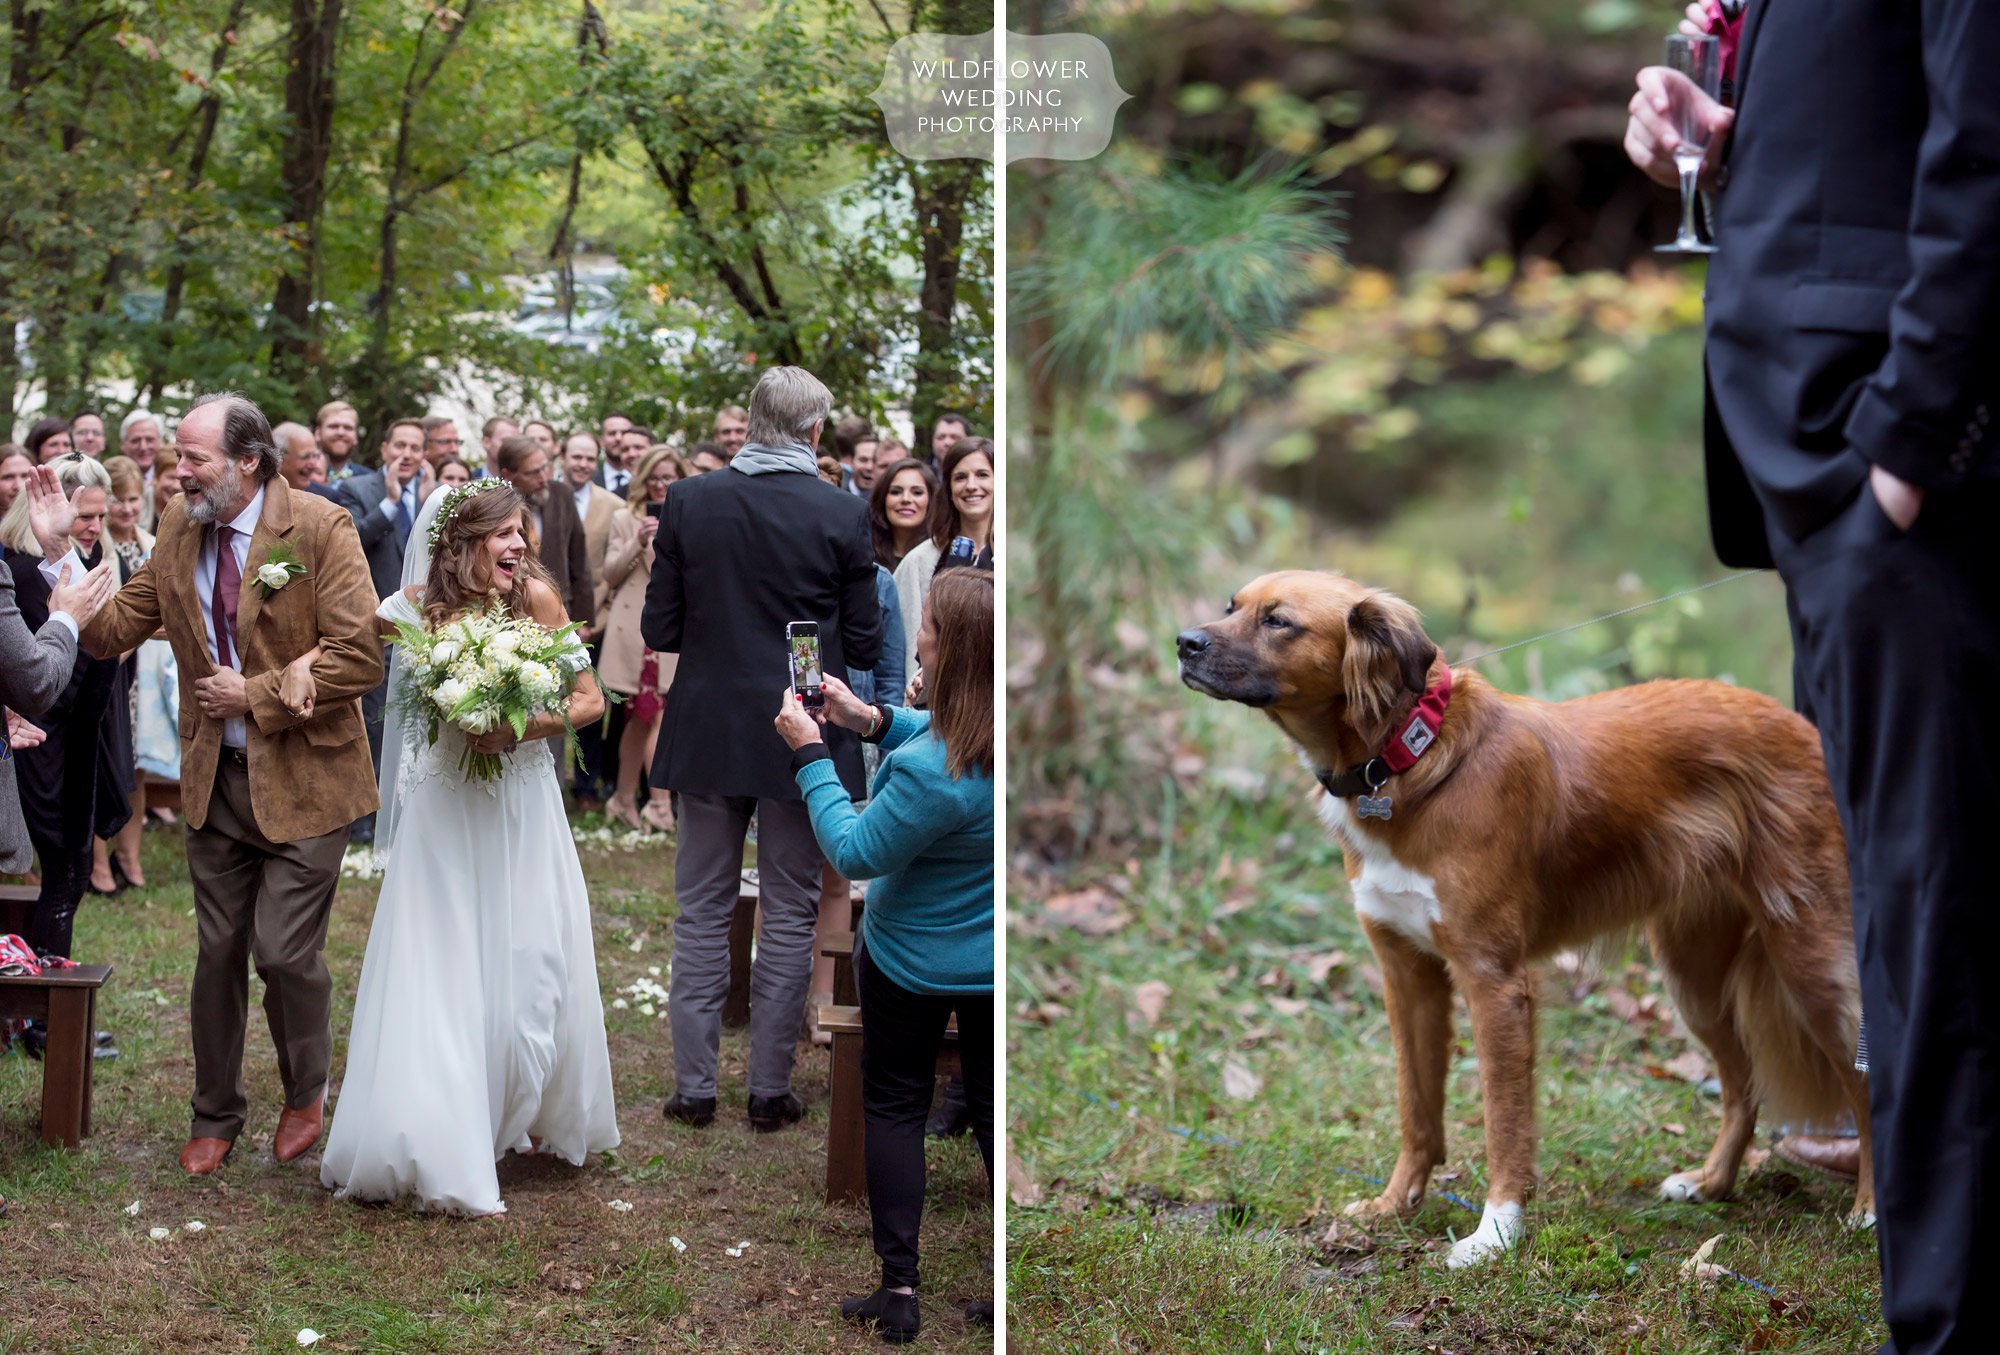 Happiest bride and her dad walk into the woodsy wedding ceremony at Little Piney Lodge.